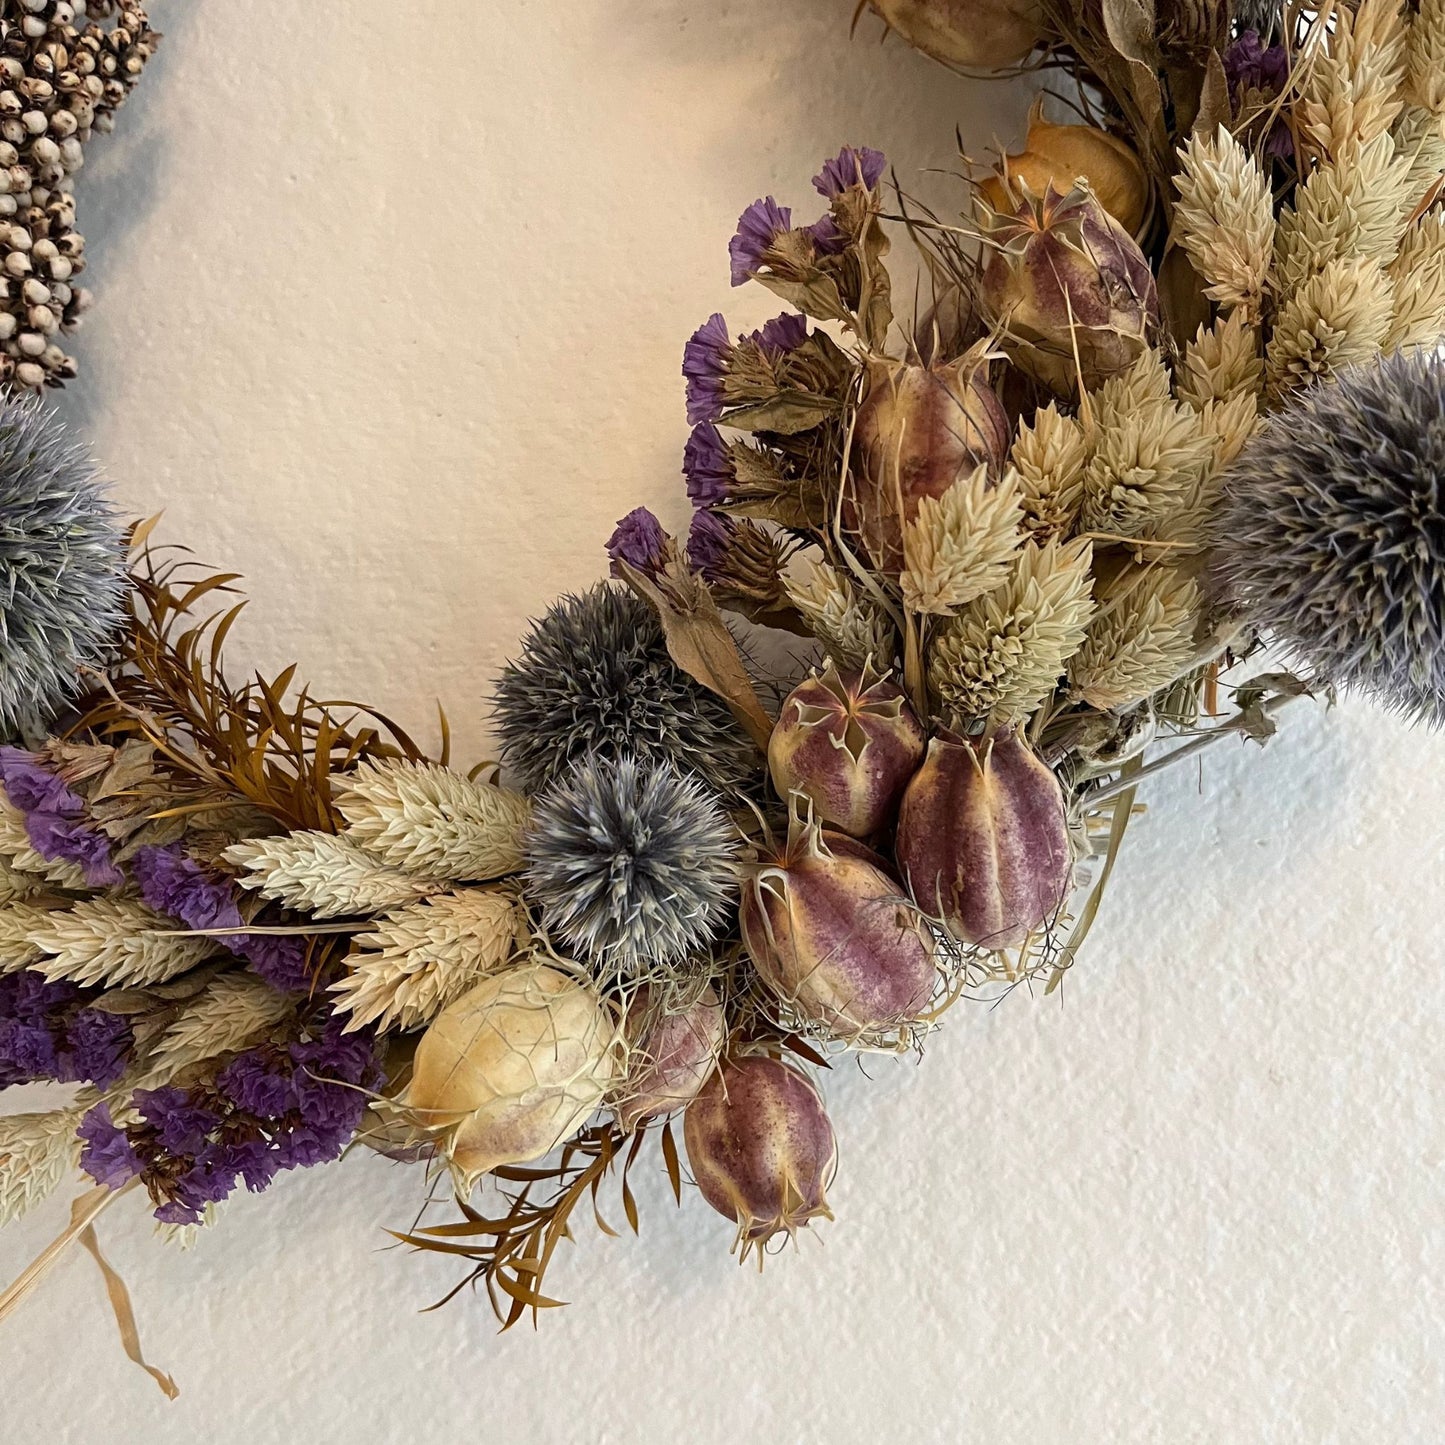 Handmade Dried Floral Wreath with Echinops.